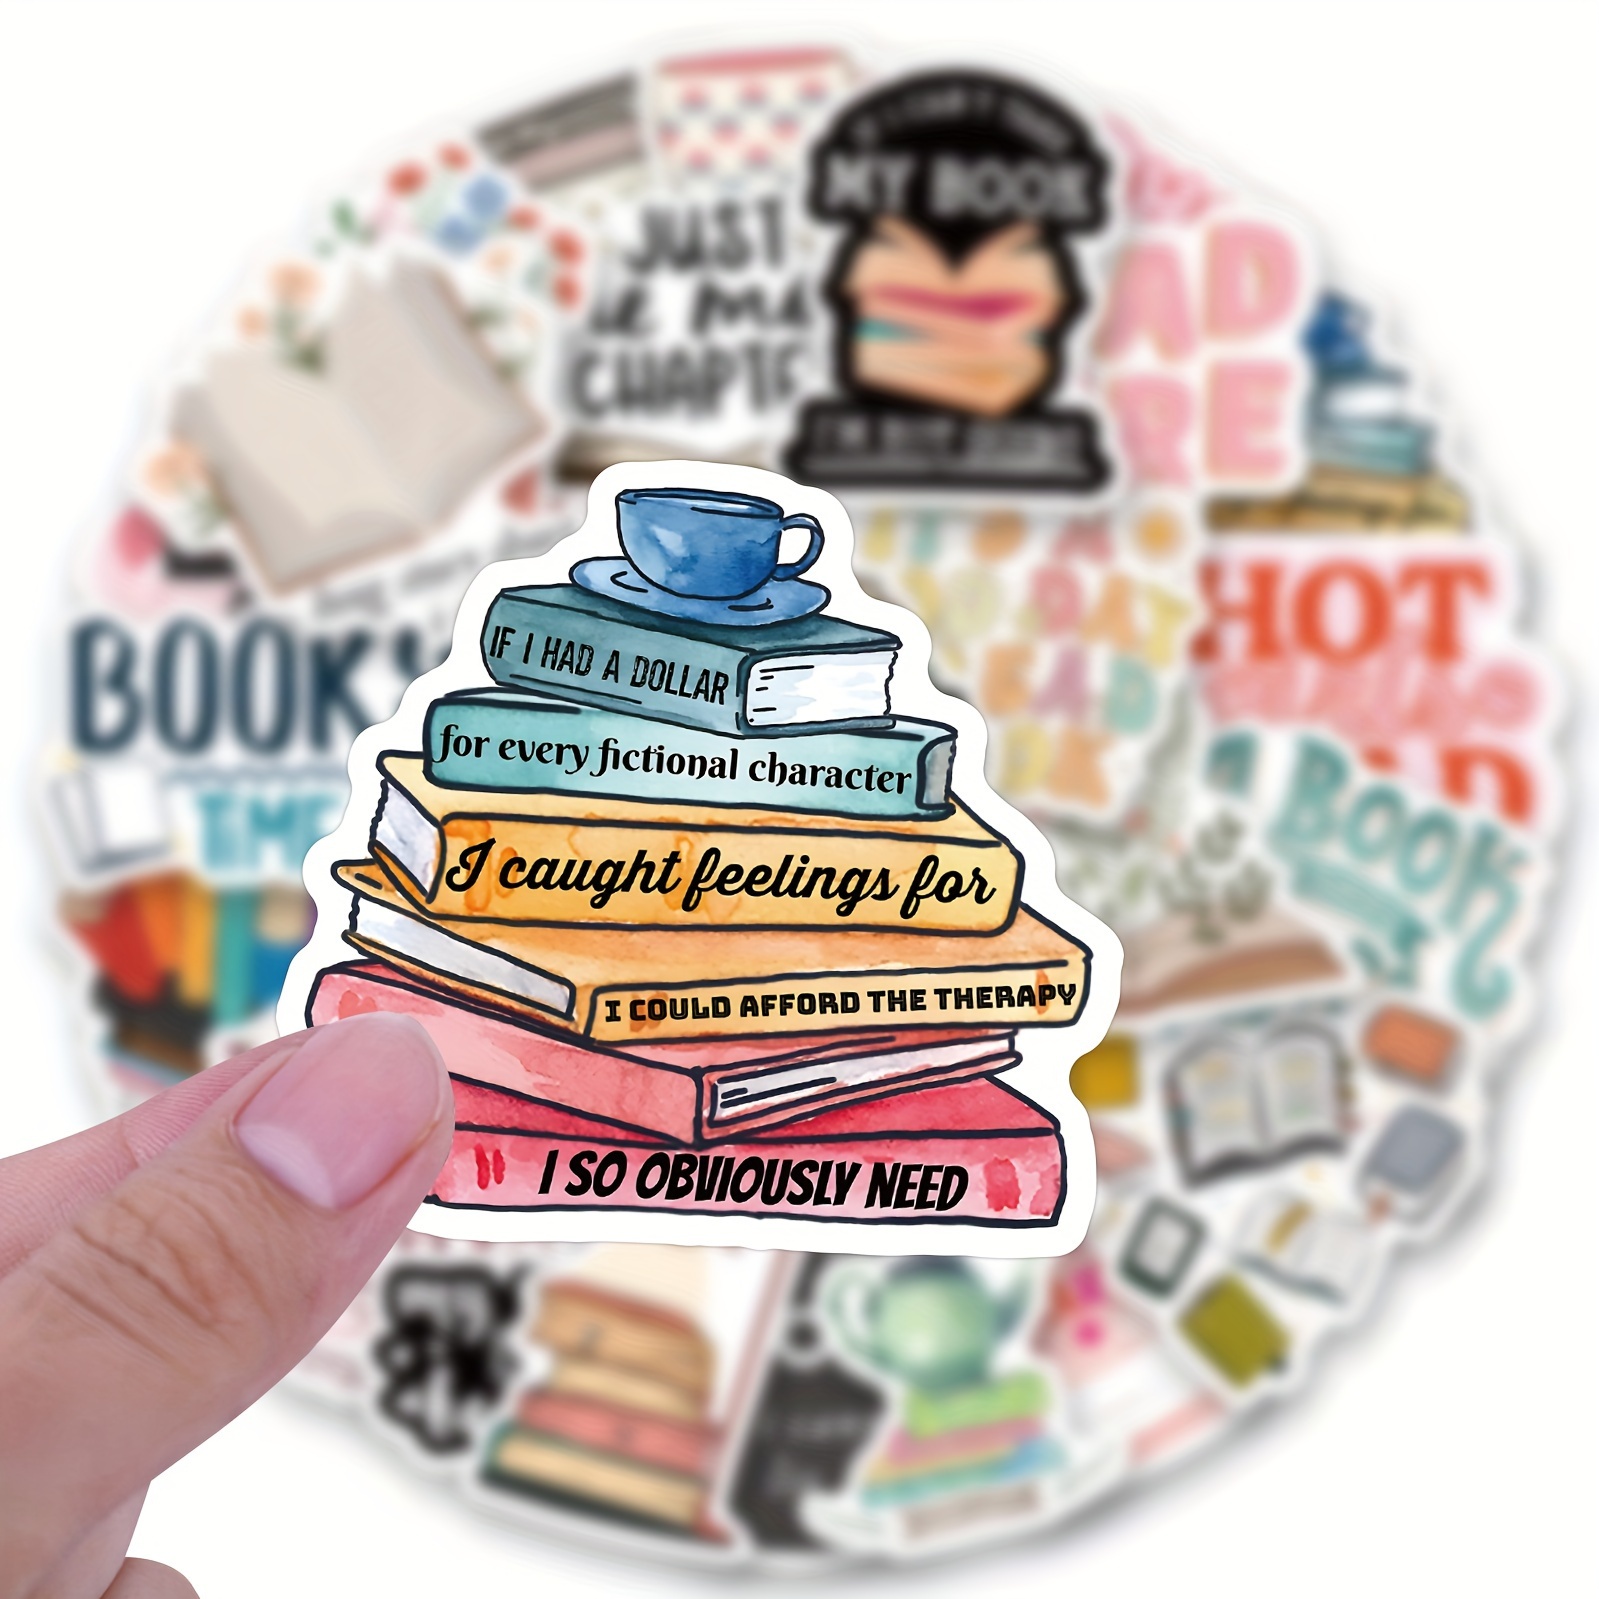 51pcs Bookish Stickers,Book Stickers For Kindle,Laptop Computer Phone Water  Bottle Waterproof Stickers Book Lover Gift